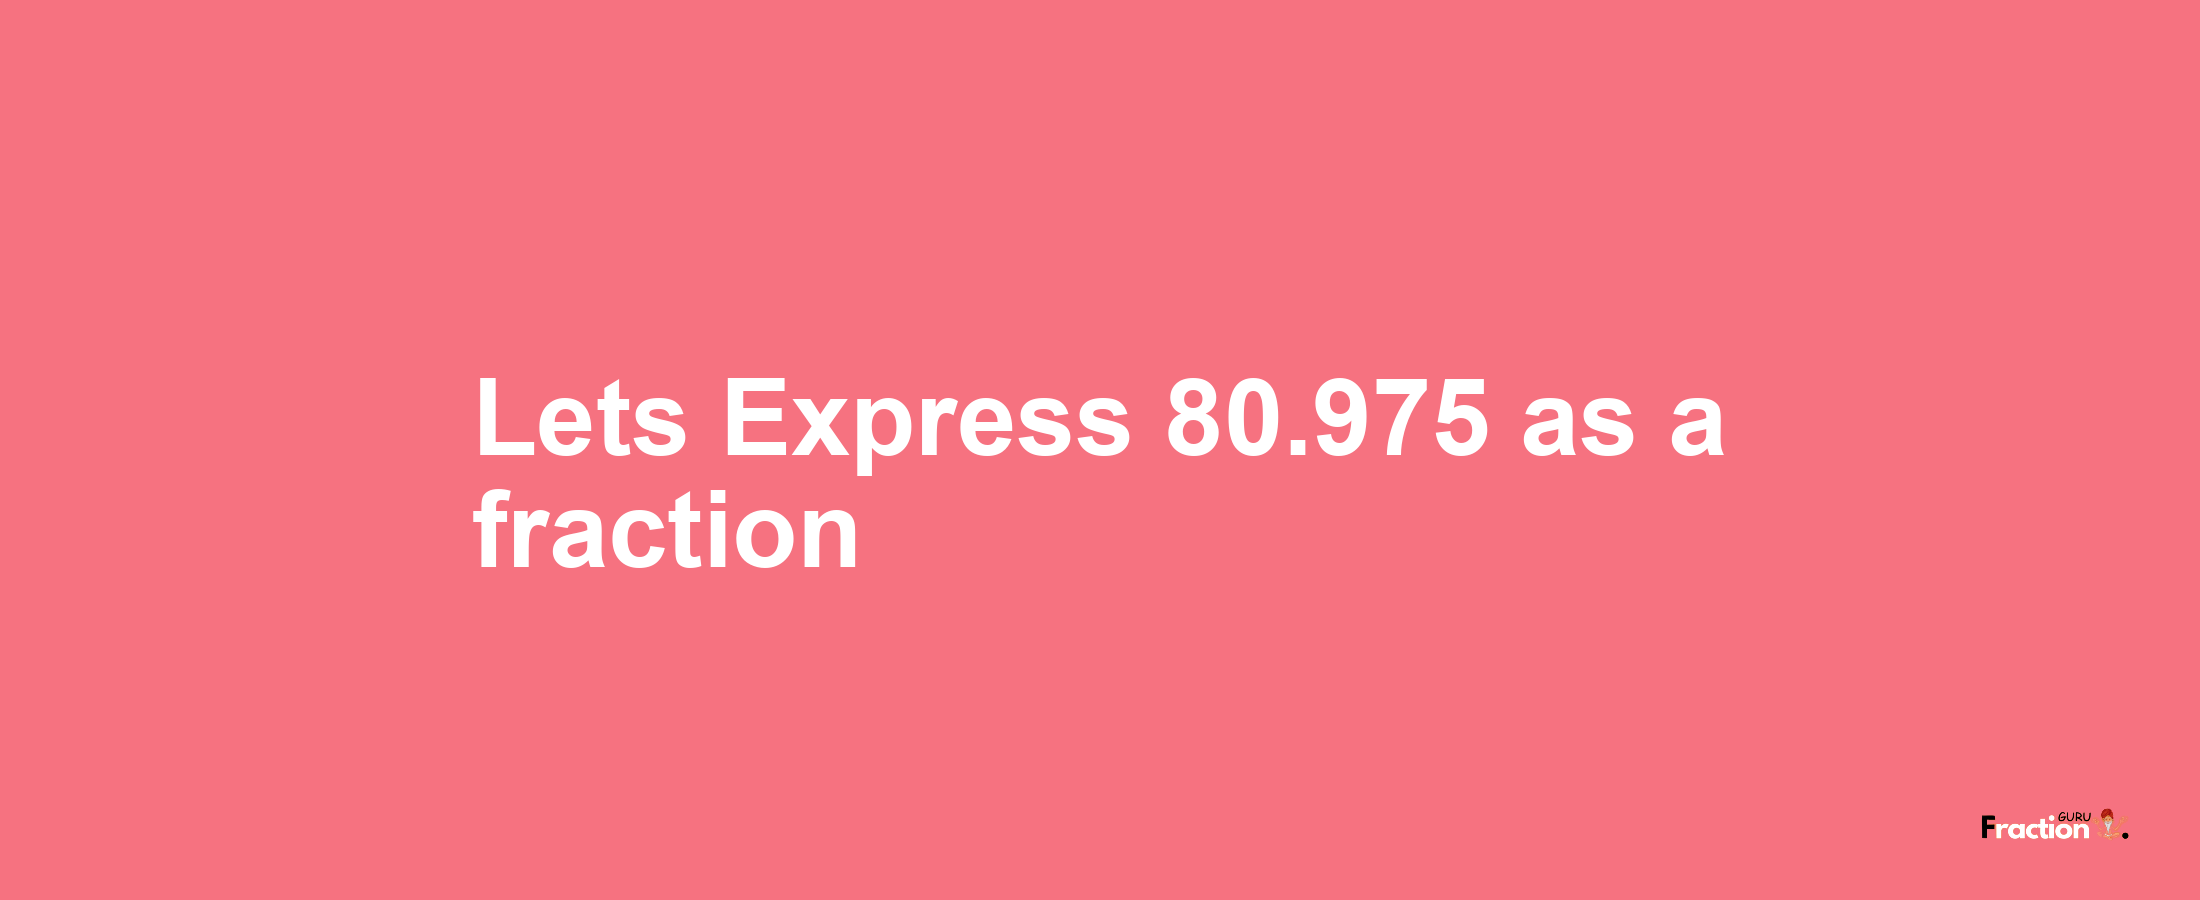 Lets Express 80.975 as afraction